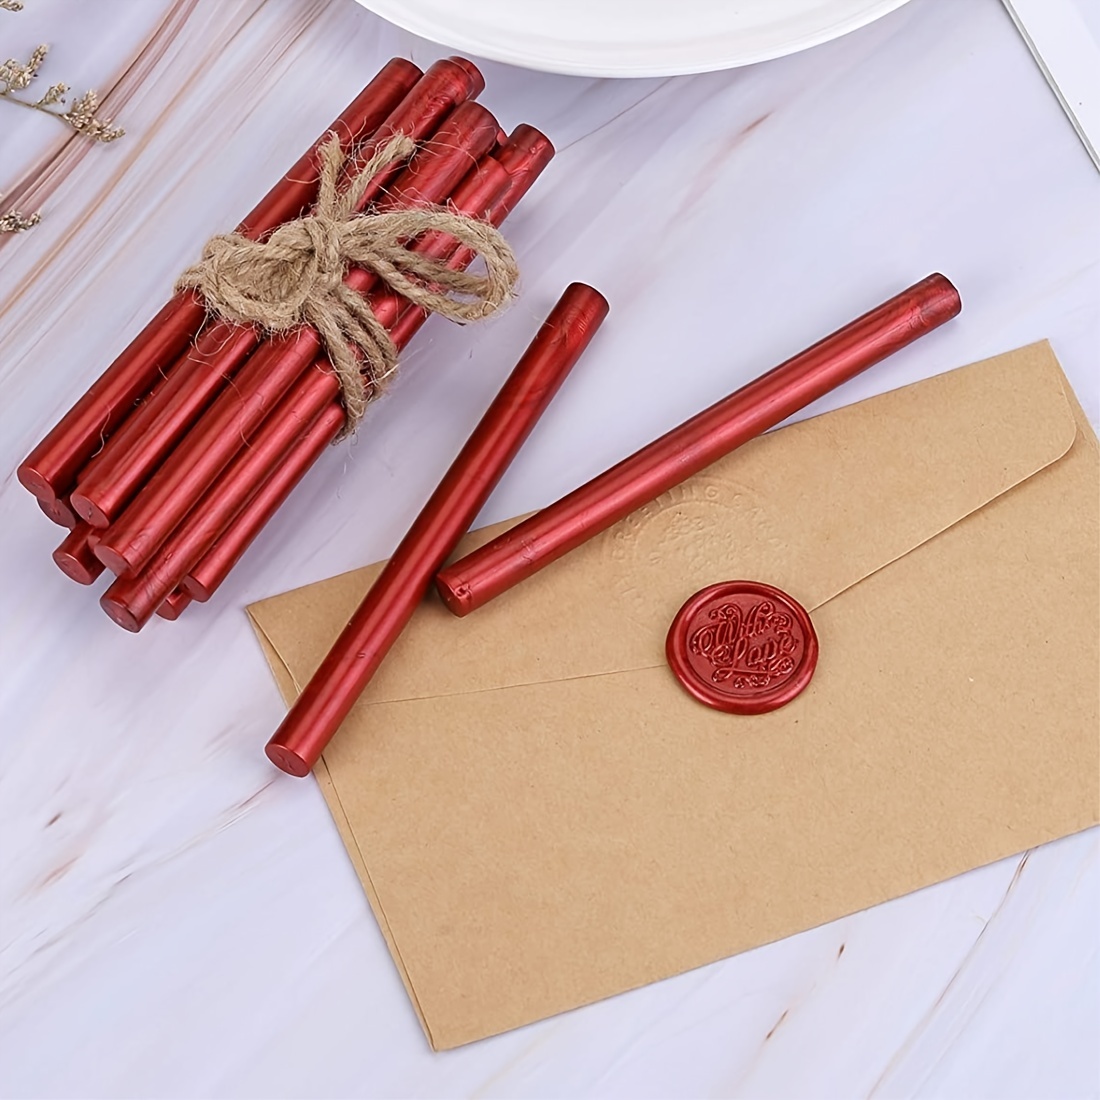 Sealing Wax Sticks in modern Glue Gun format make flexible and mailable wax  seals. Easy to use to for making multiple impressions with wax seal stamps  for invitation, to seal gifts and